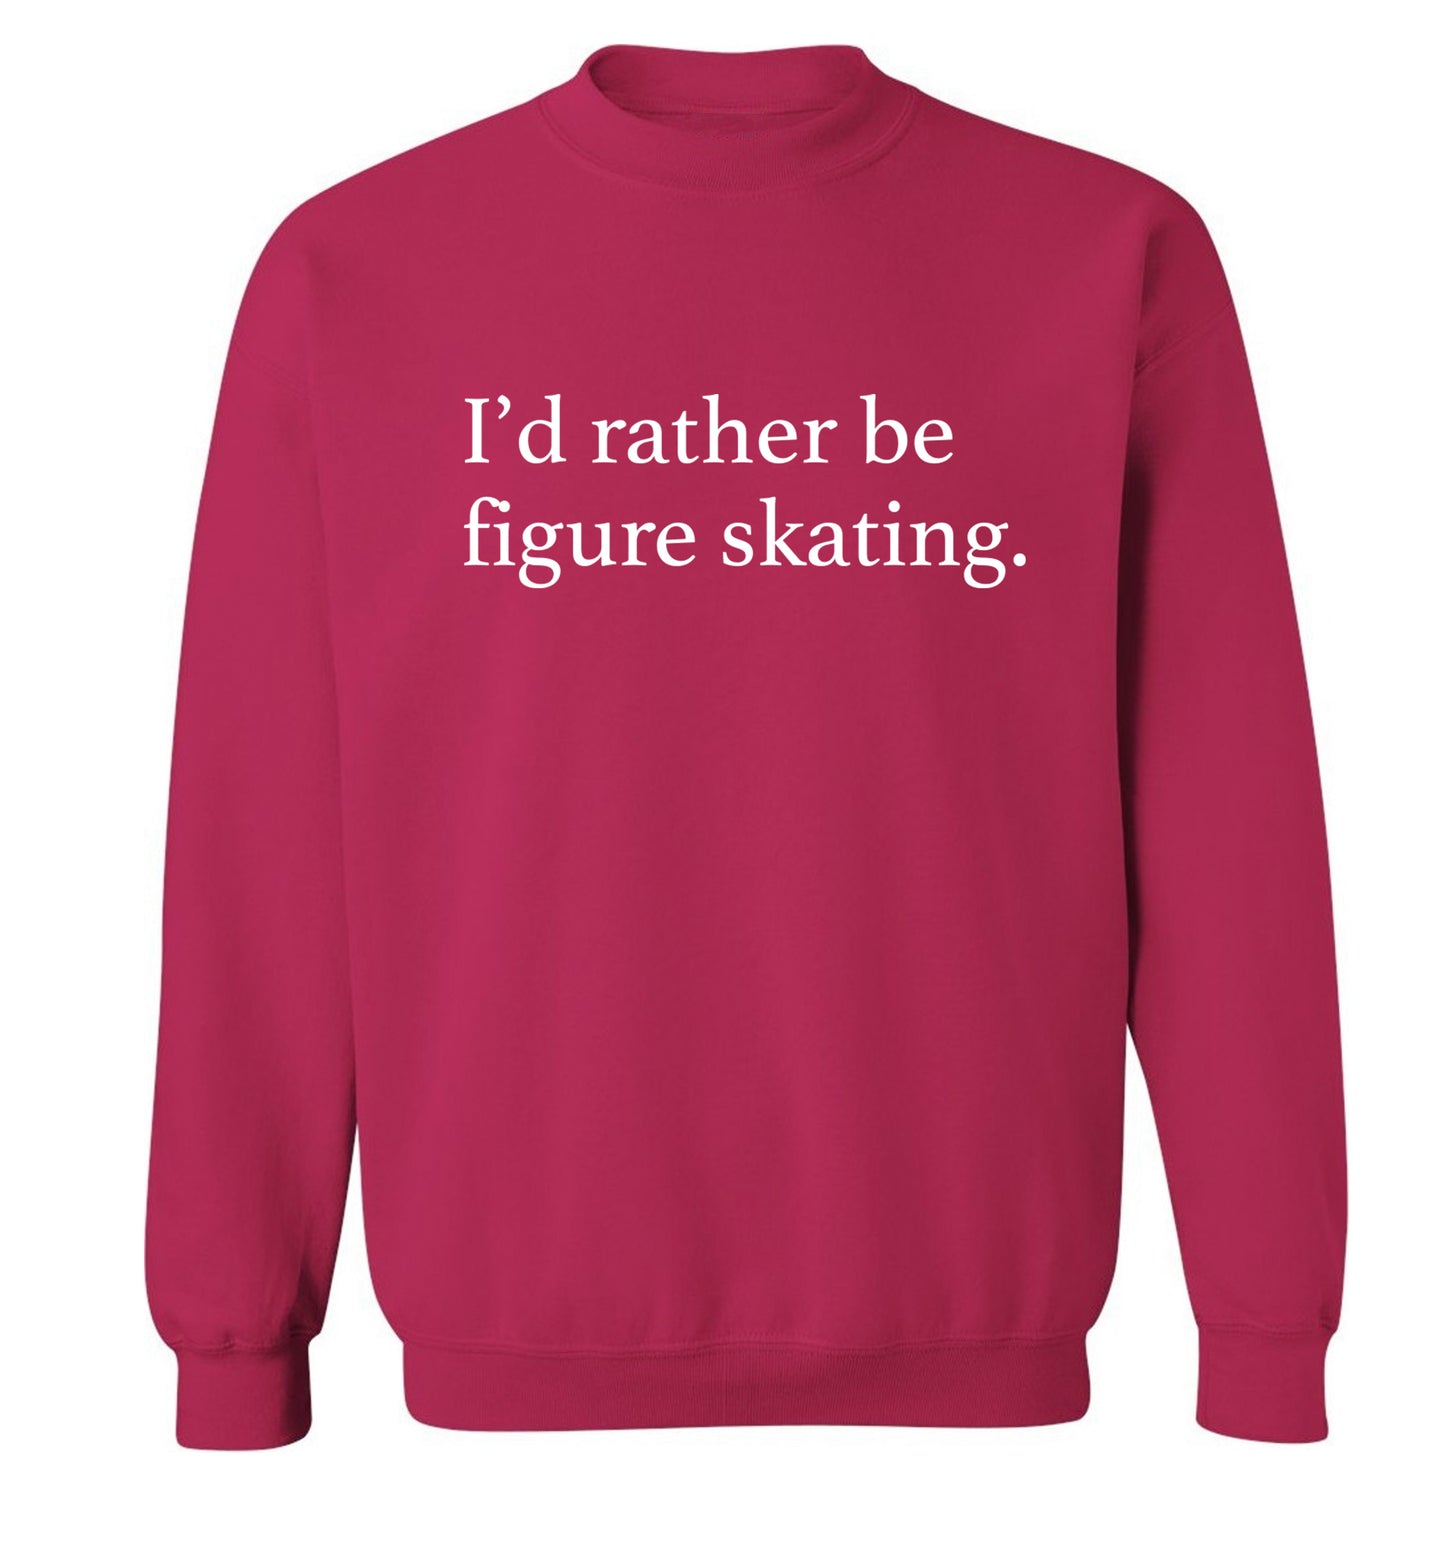 I'd rather be figure skating Adult's unisexpink Sweater 2XL